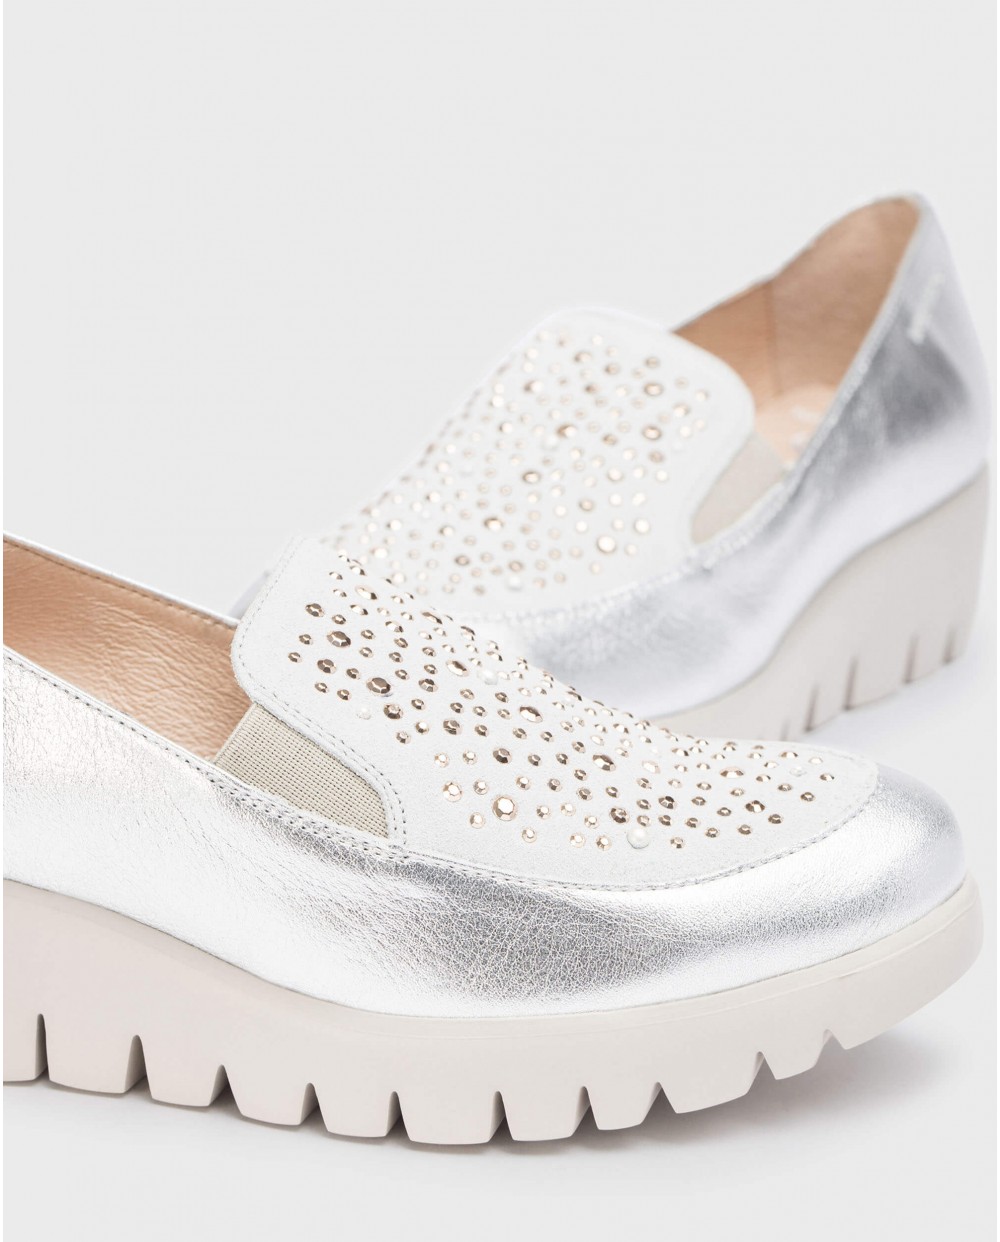 Wonders-Loafers-Metallic patent leather Diamant loafer